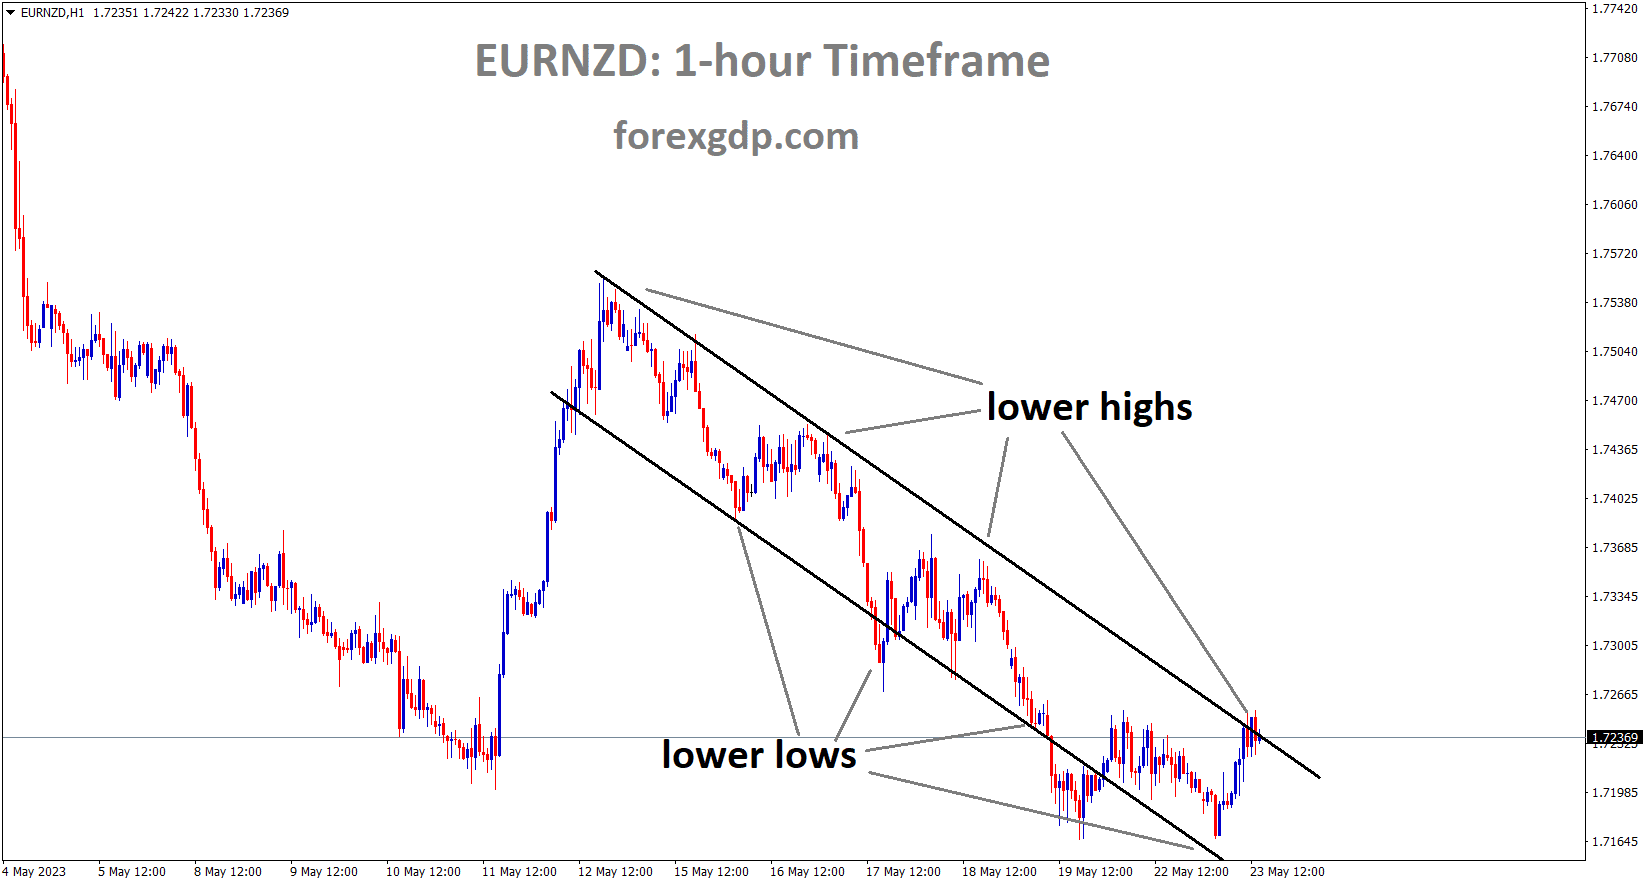 EURNZD H1 TF analysis Market is moving in the Descending channel and the market has reached the lower high area of the channel